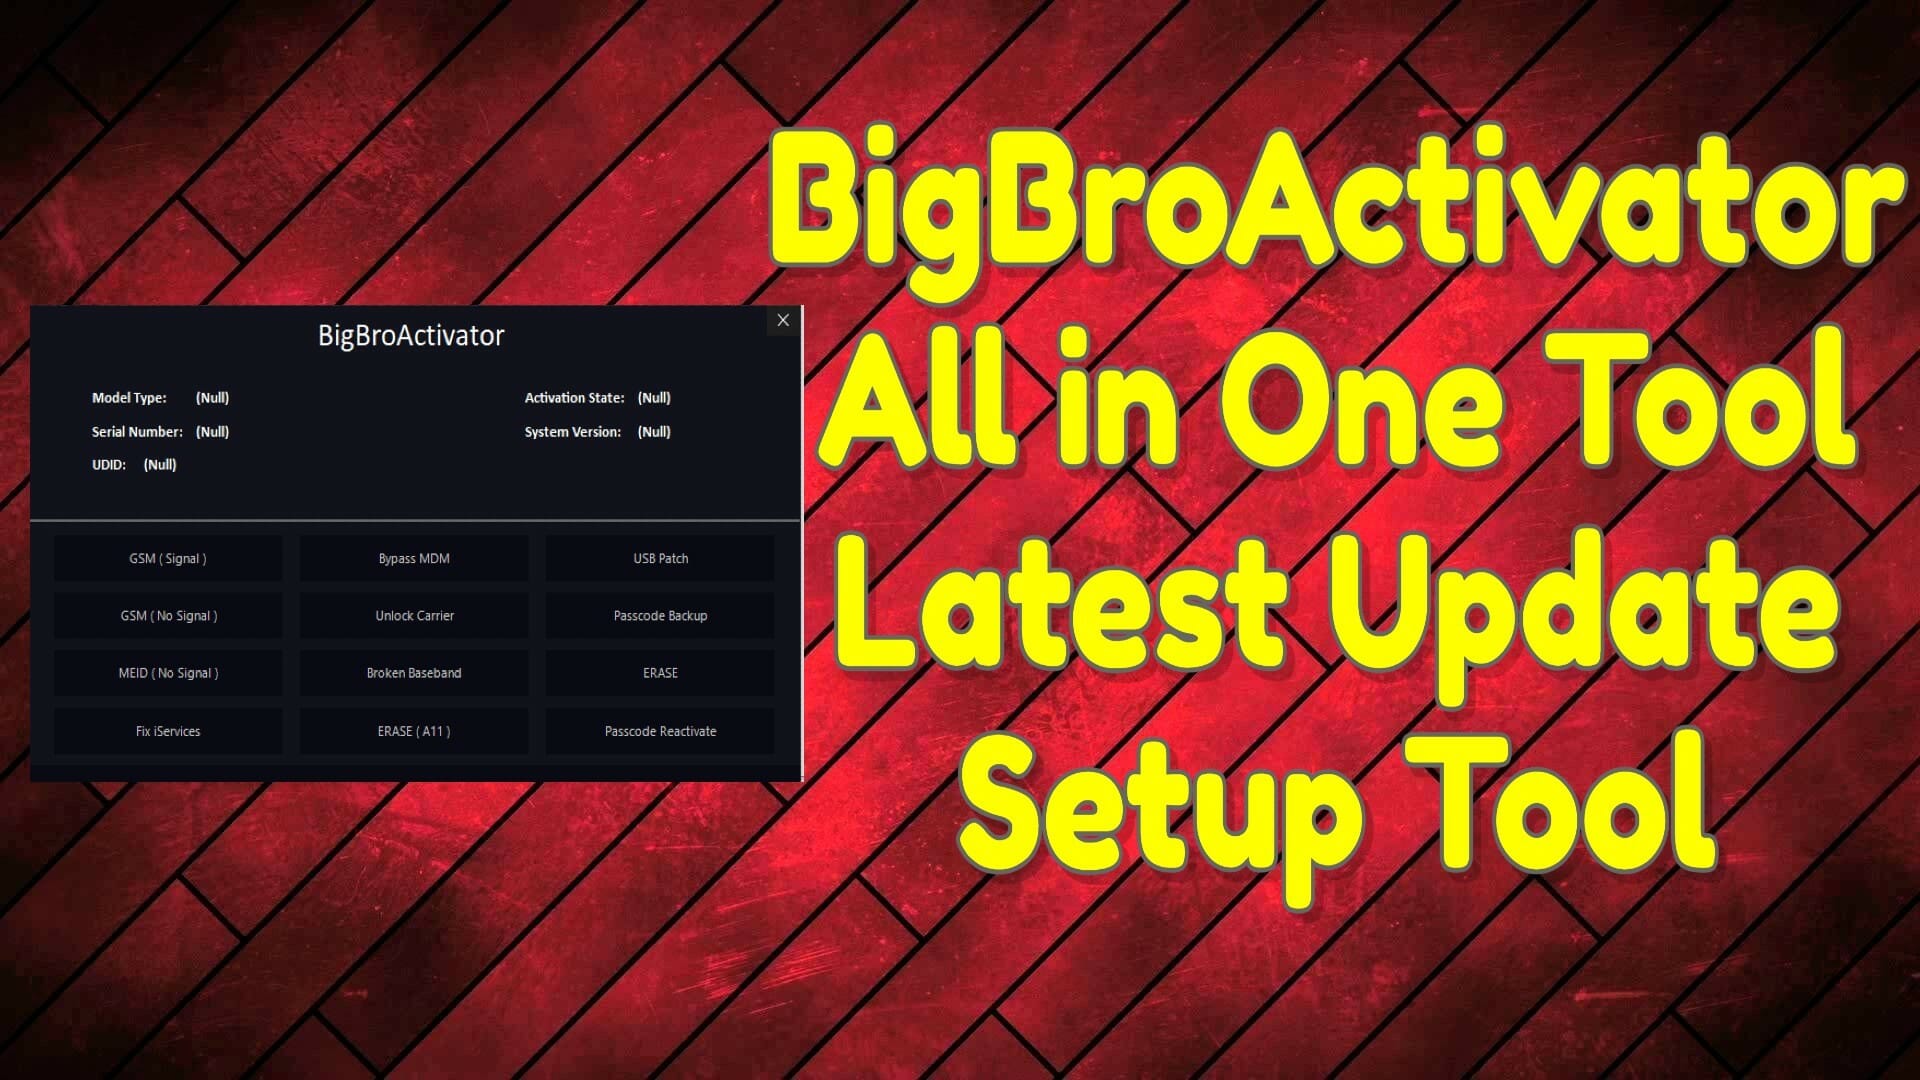 BigBroActivator All-in-One Tool Latest Icloud Removal Tool